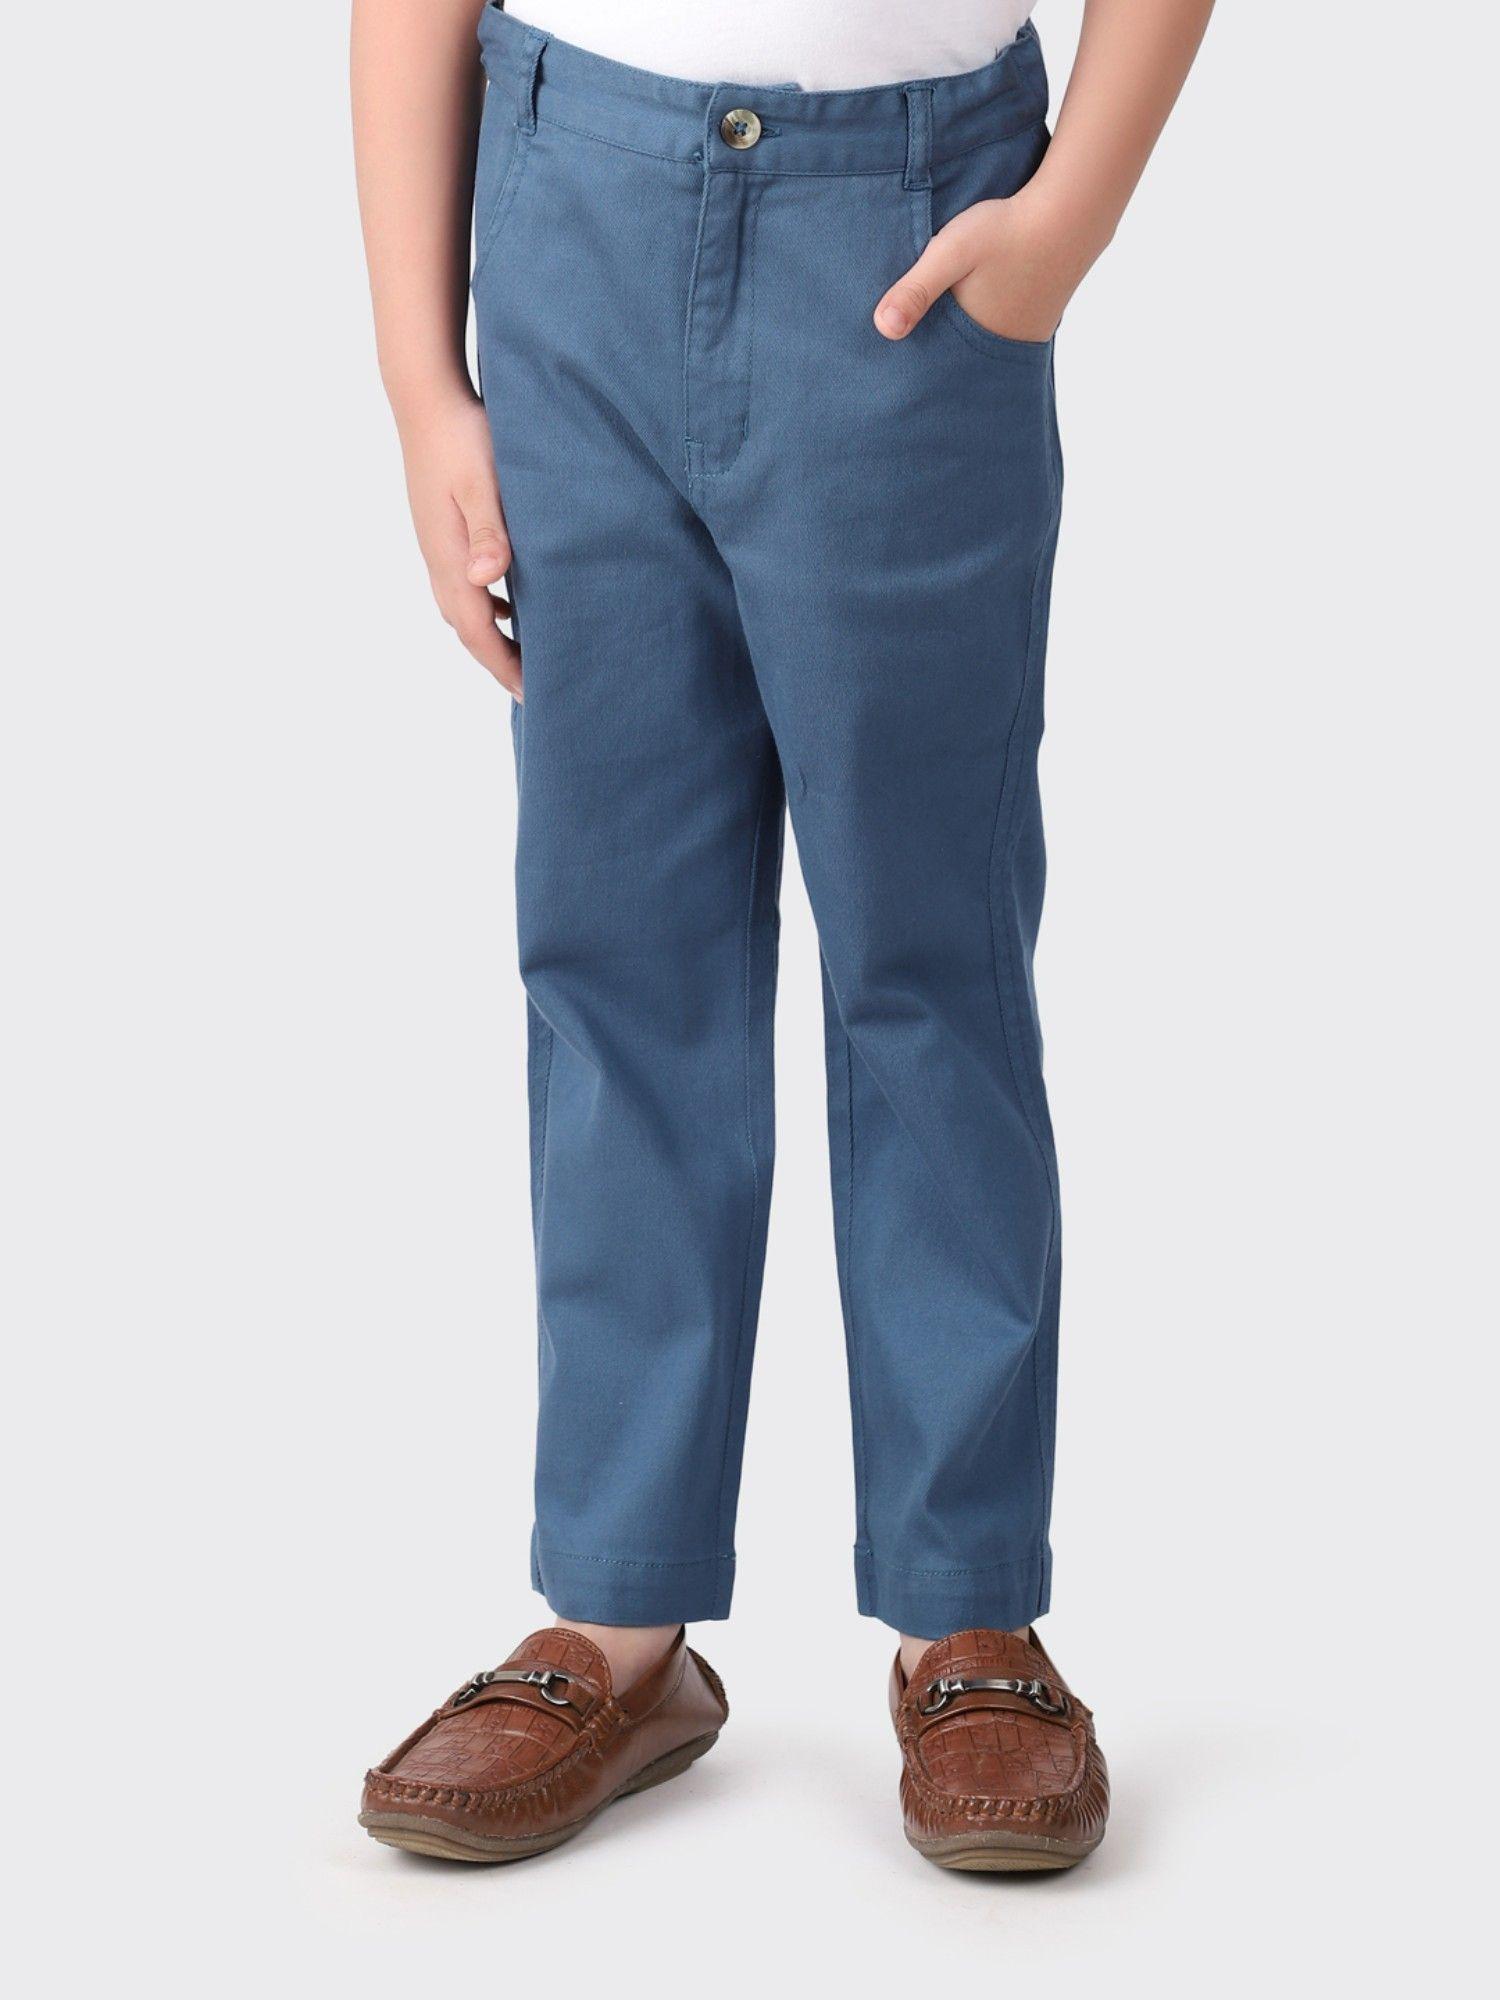 solid navy blue cotton pant